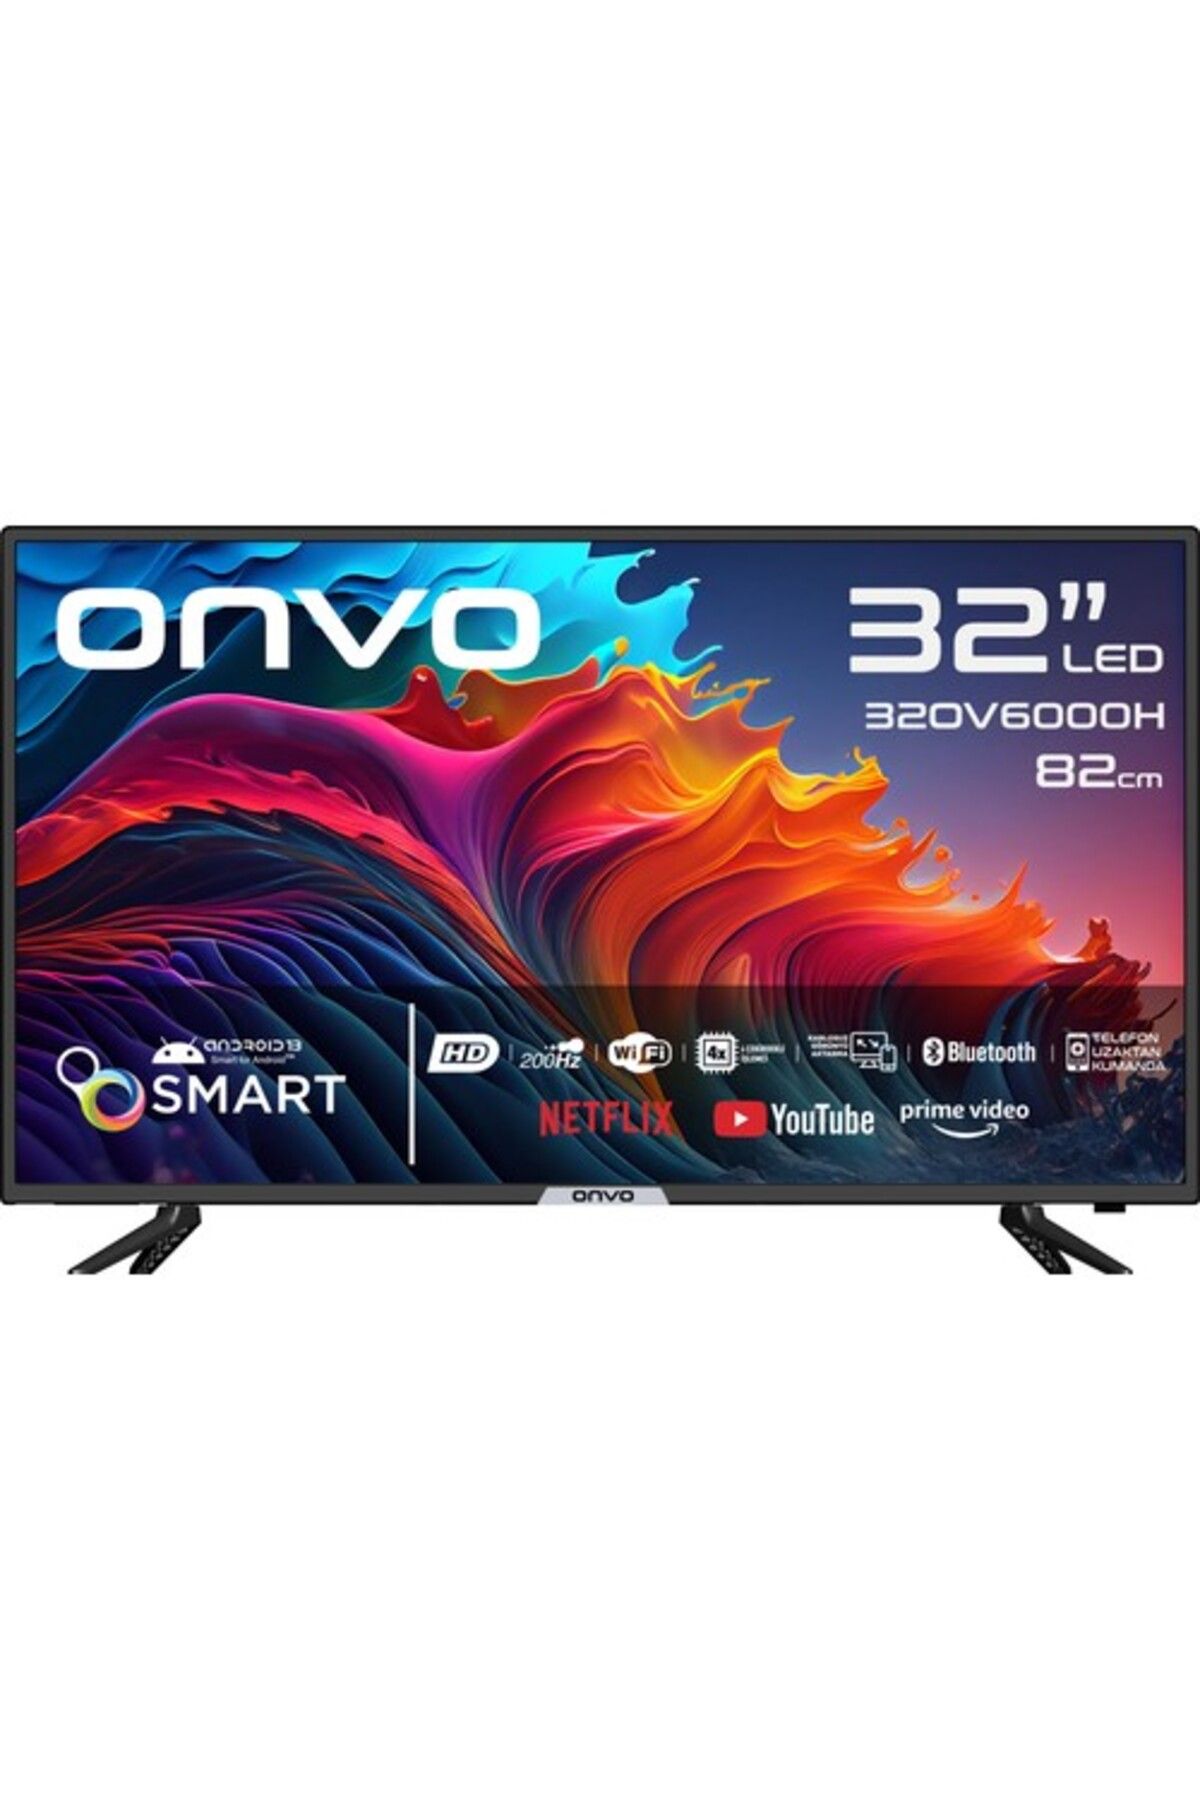 32OV6000H 32" Hd Ready Android Smart Led Tv